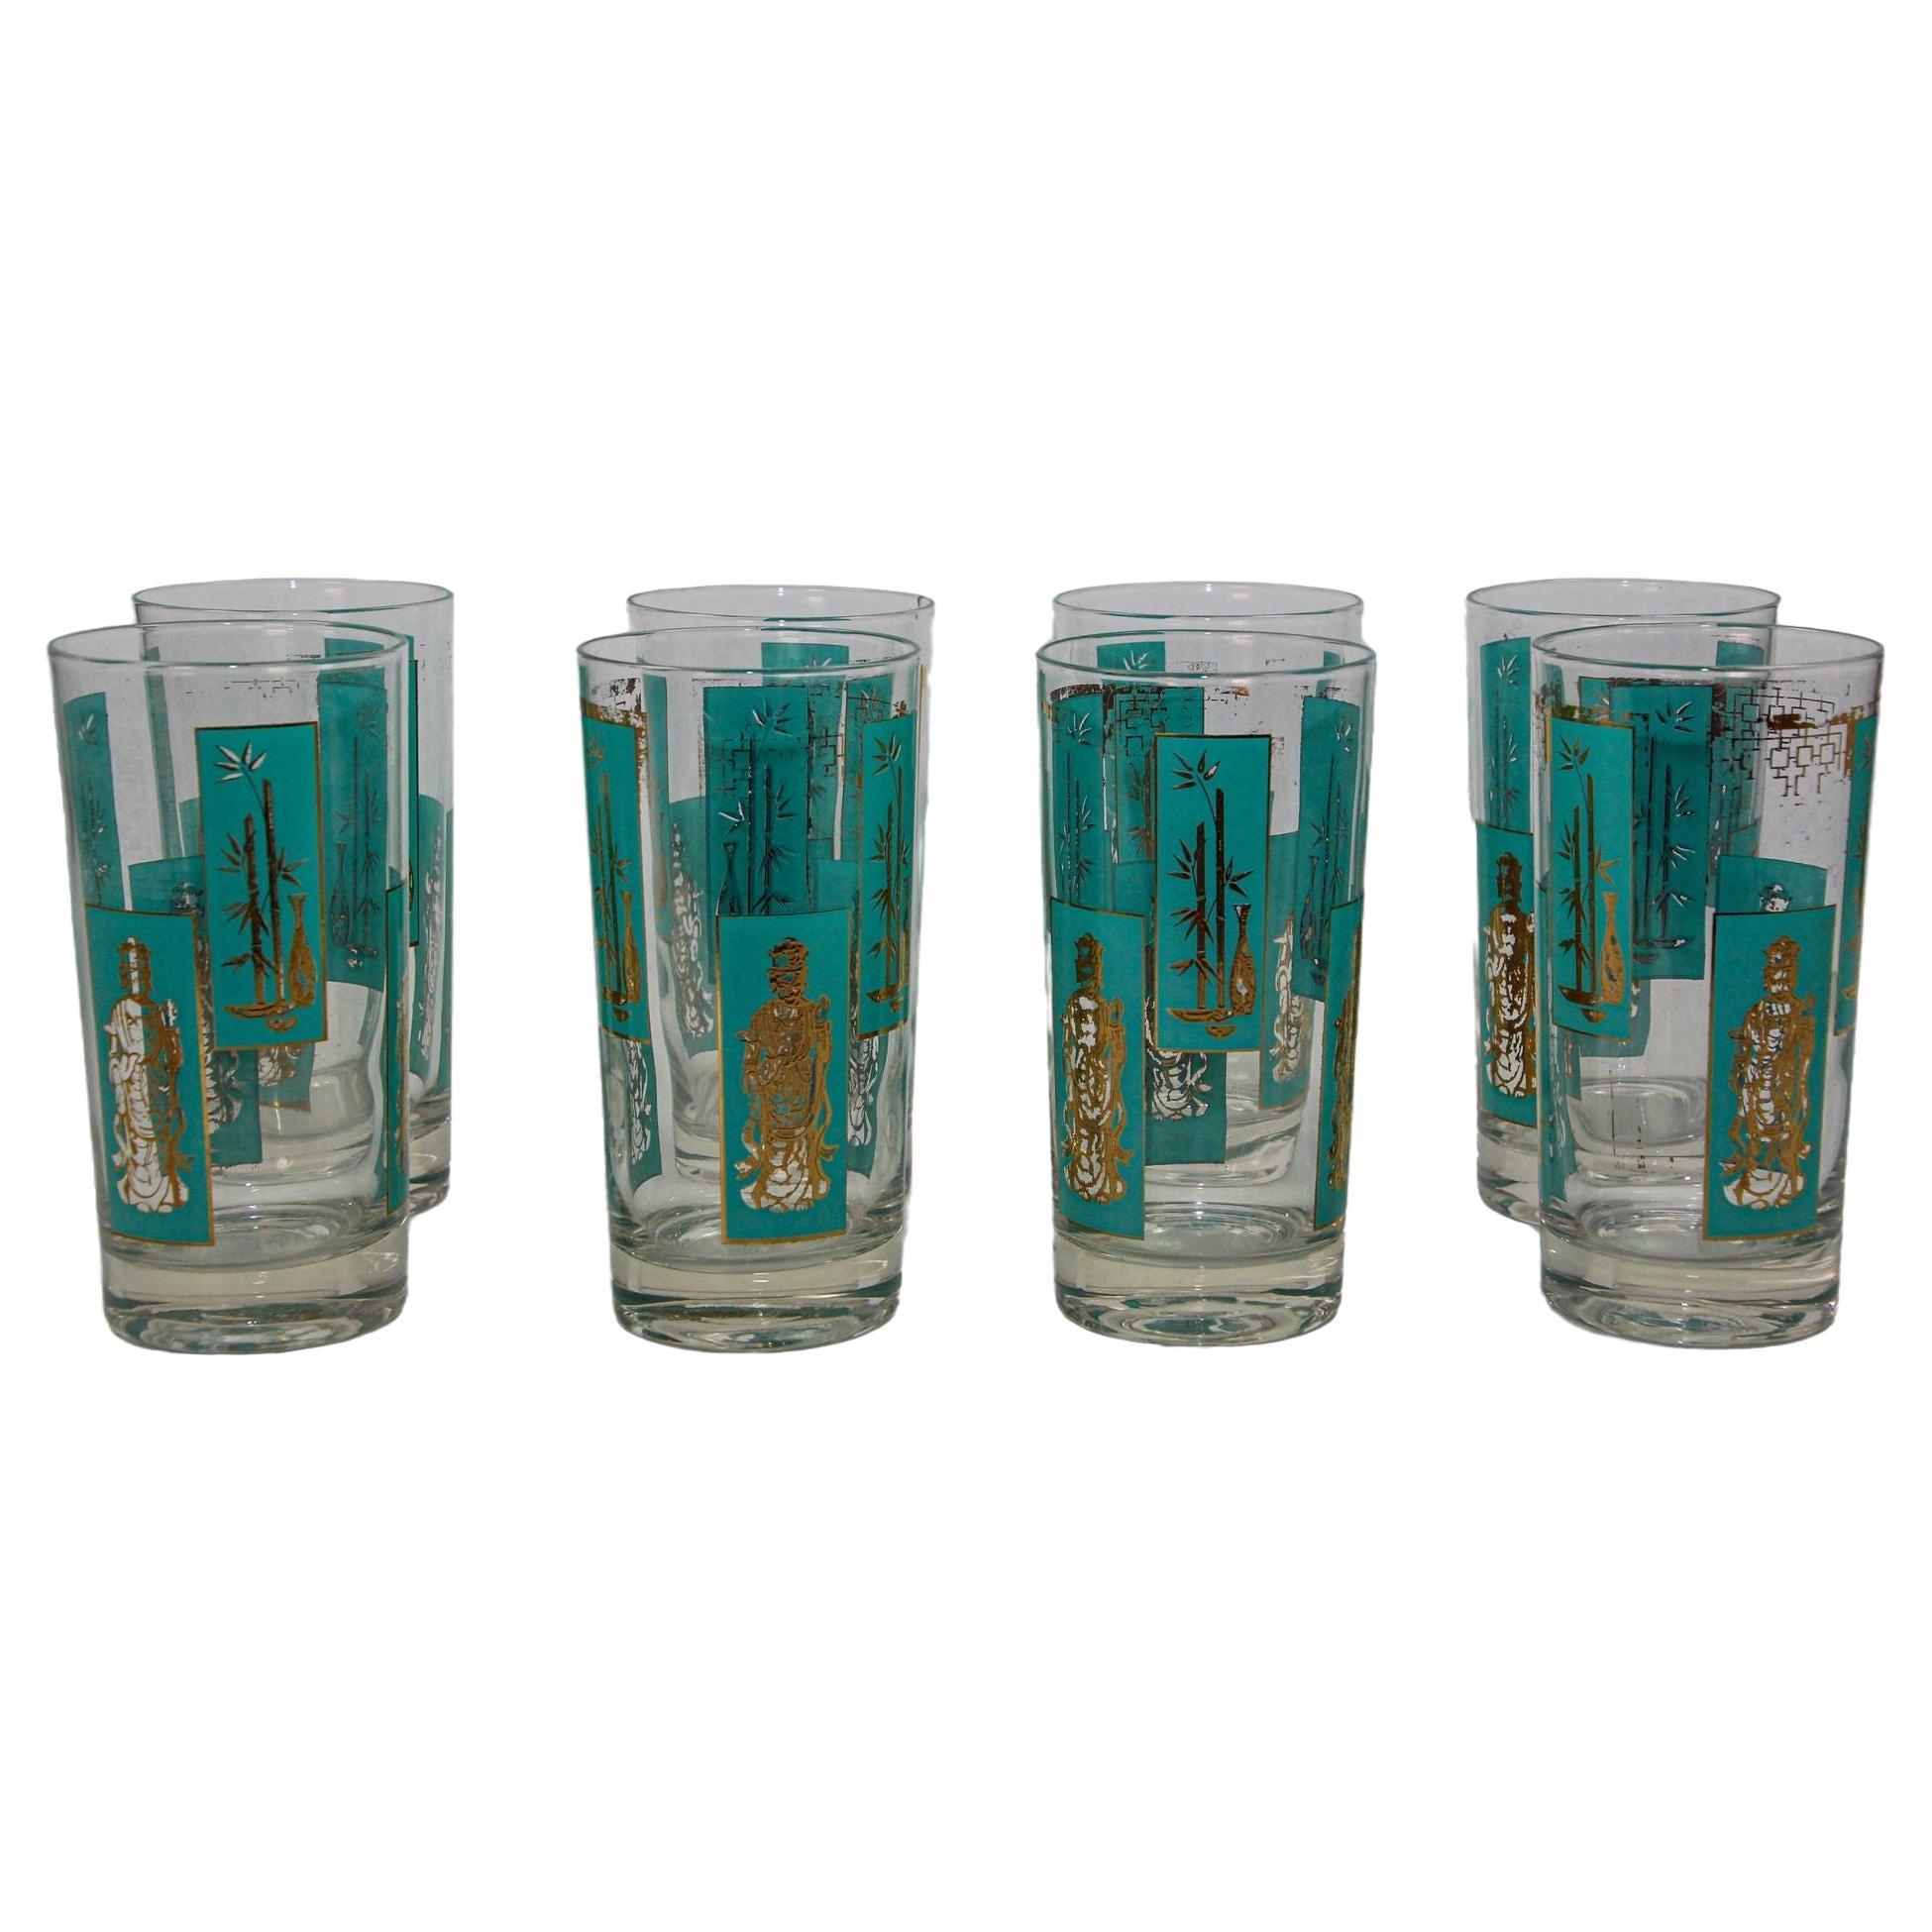 https://a.1stdibscdn.com/1960s-georges-briard-22-k-gold-and-turquoise-asian-shoji-style-highball-glasses-for-sale/f_9068/f_370304321699630650471/f_37030432_1699630651096_bg_processed.jpg